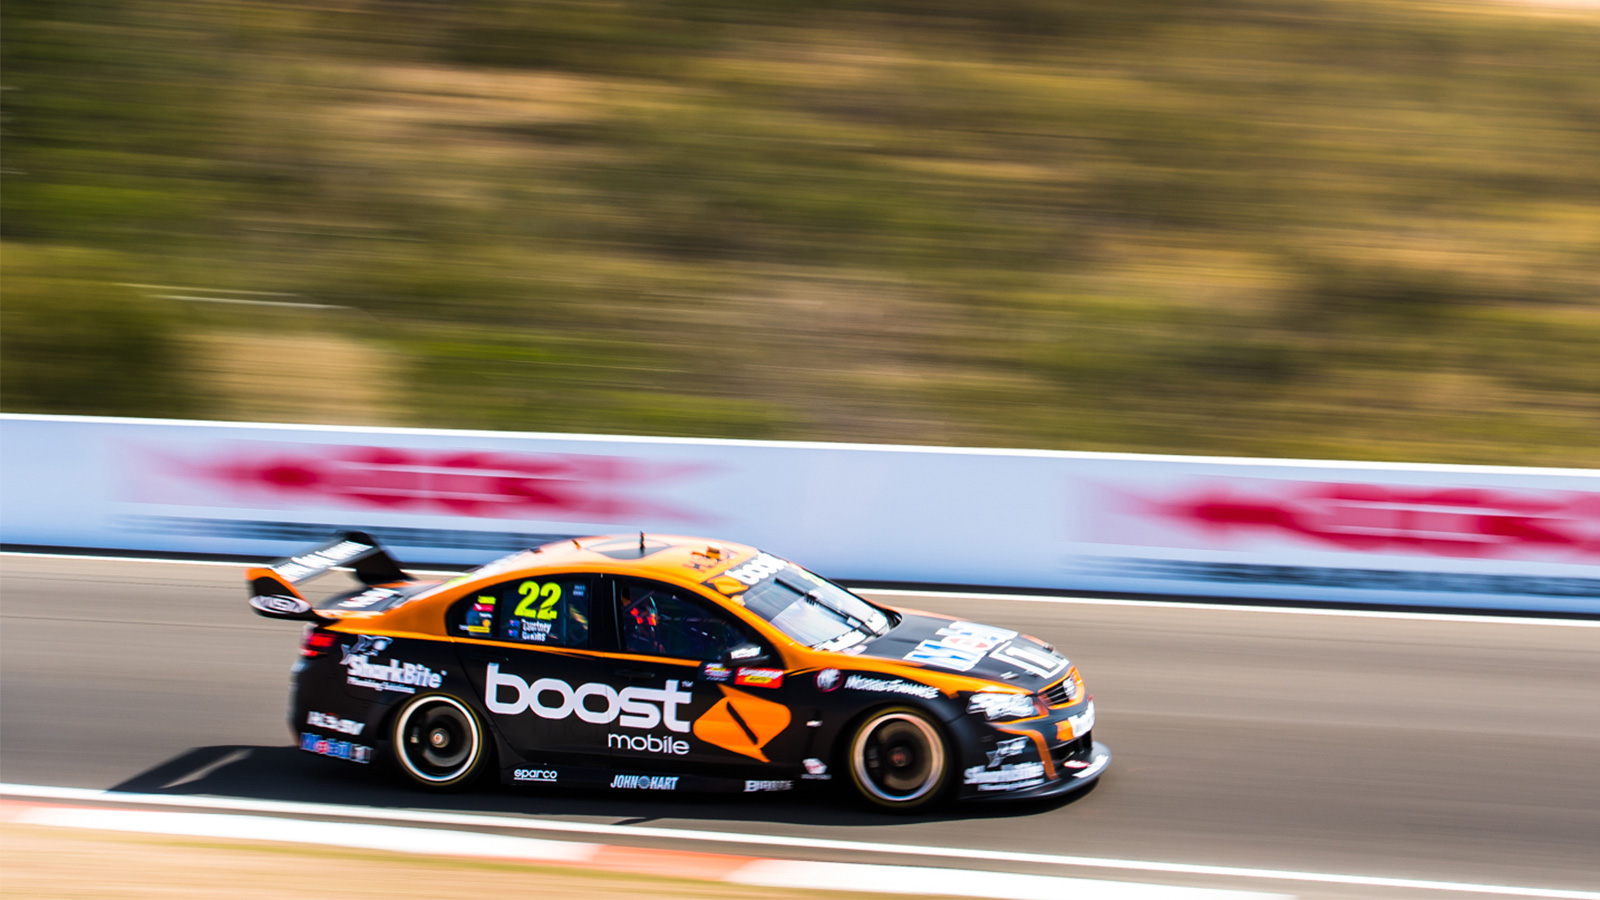 Car 22 in action at Bathurst.